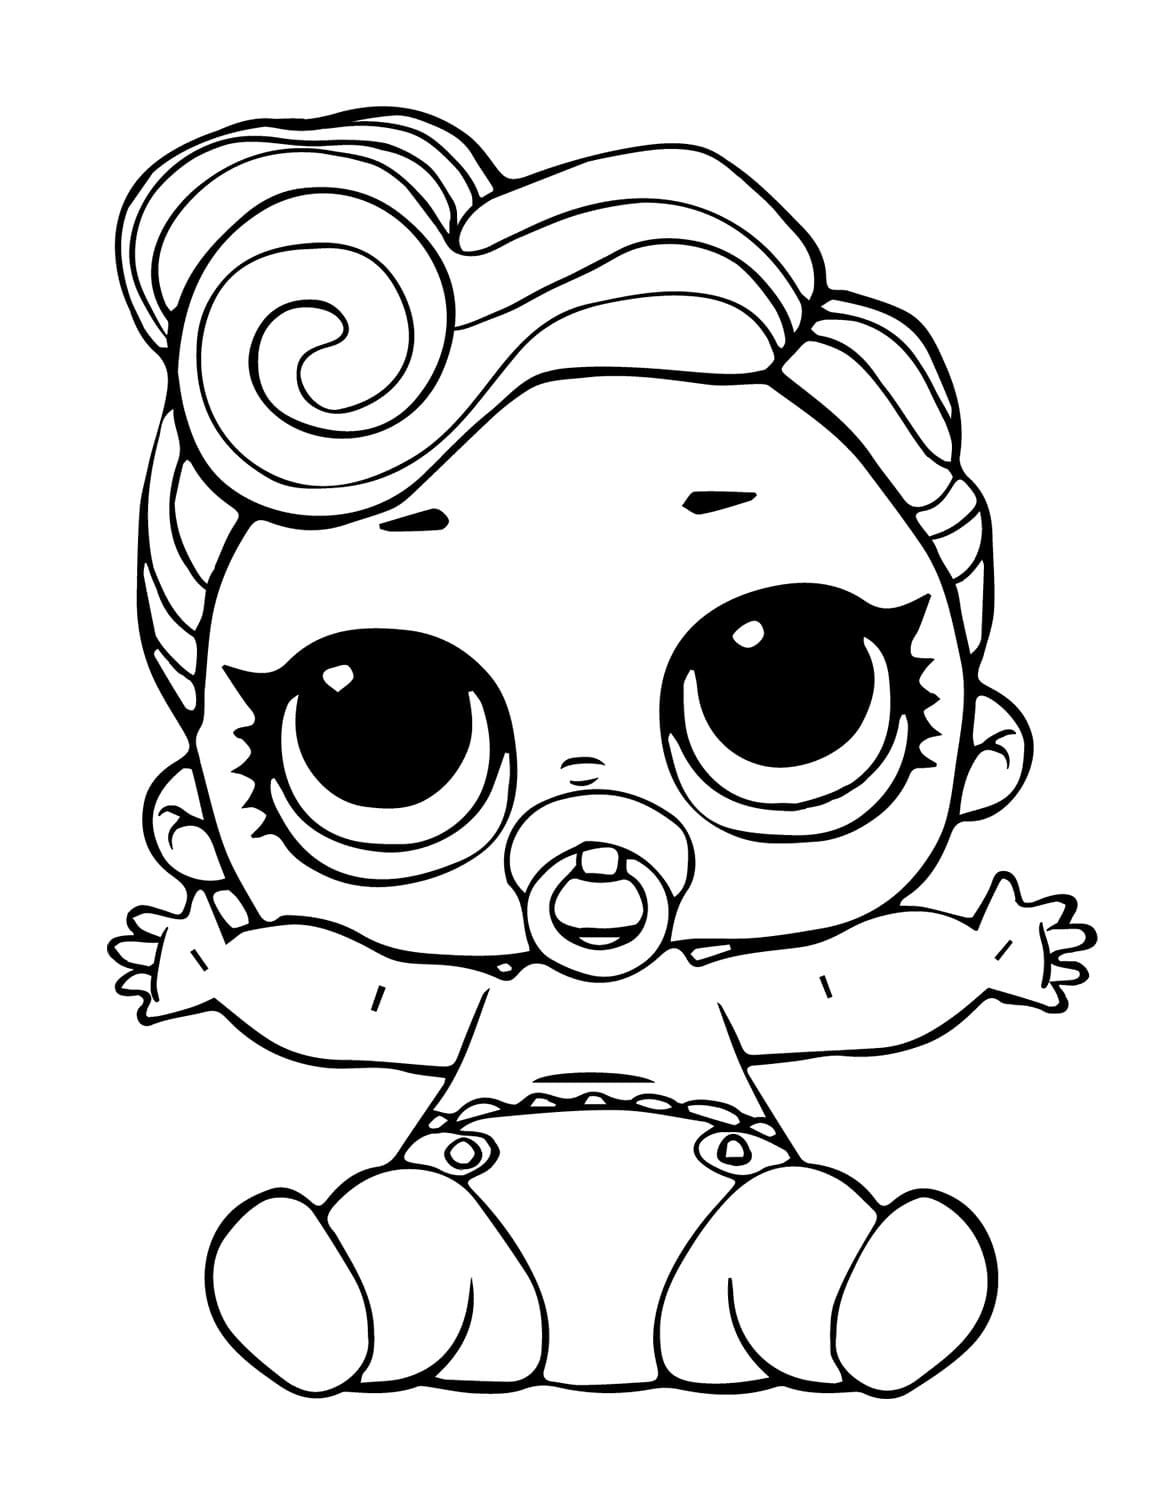 The Lil Queen LOL Surprise Doll coloring page